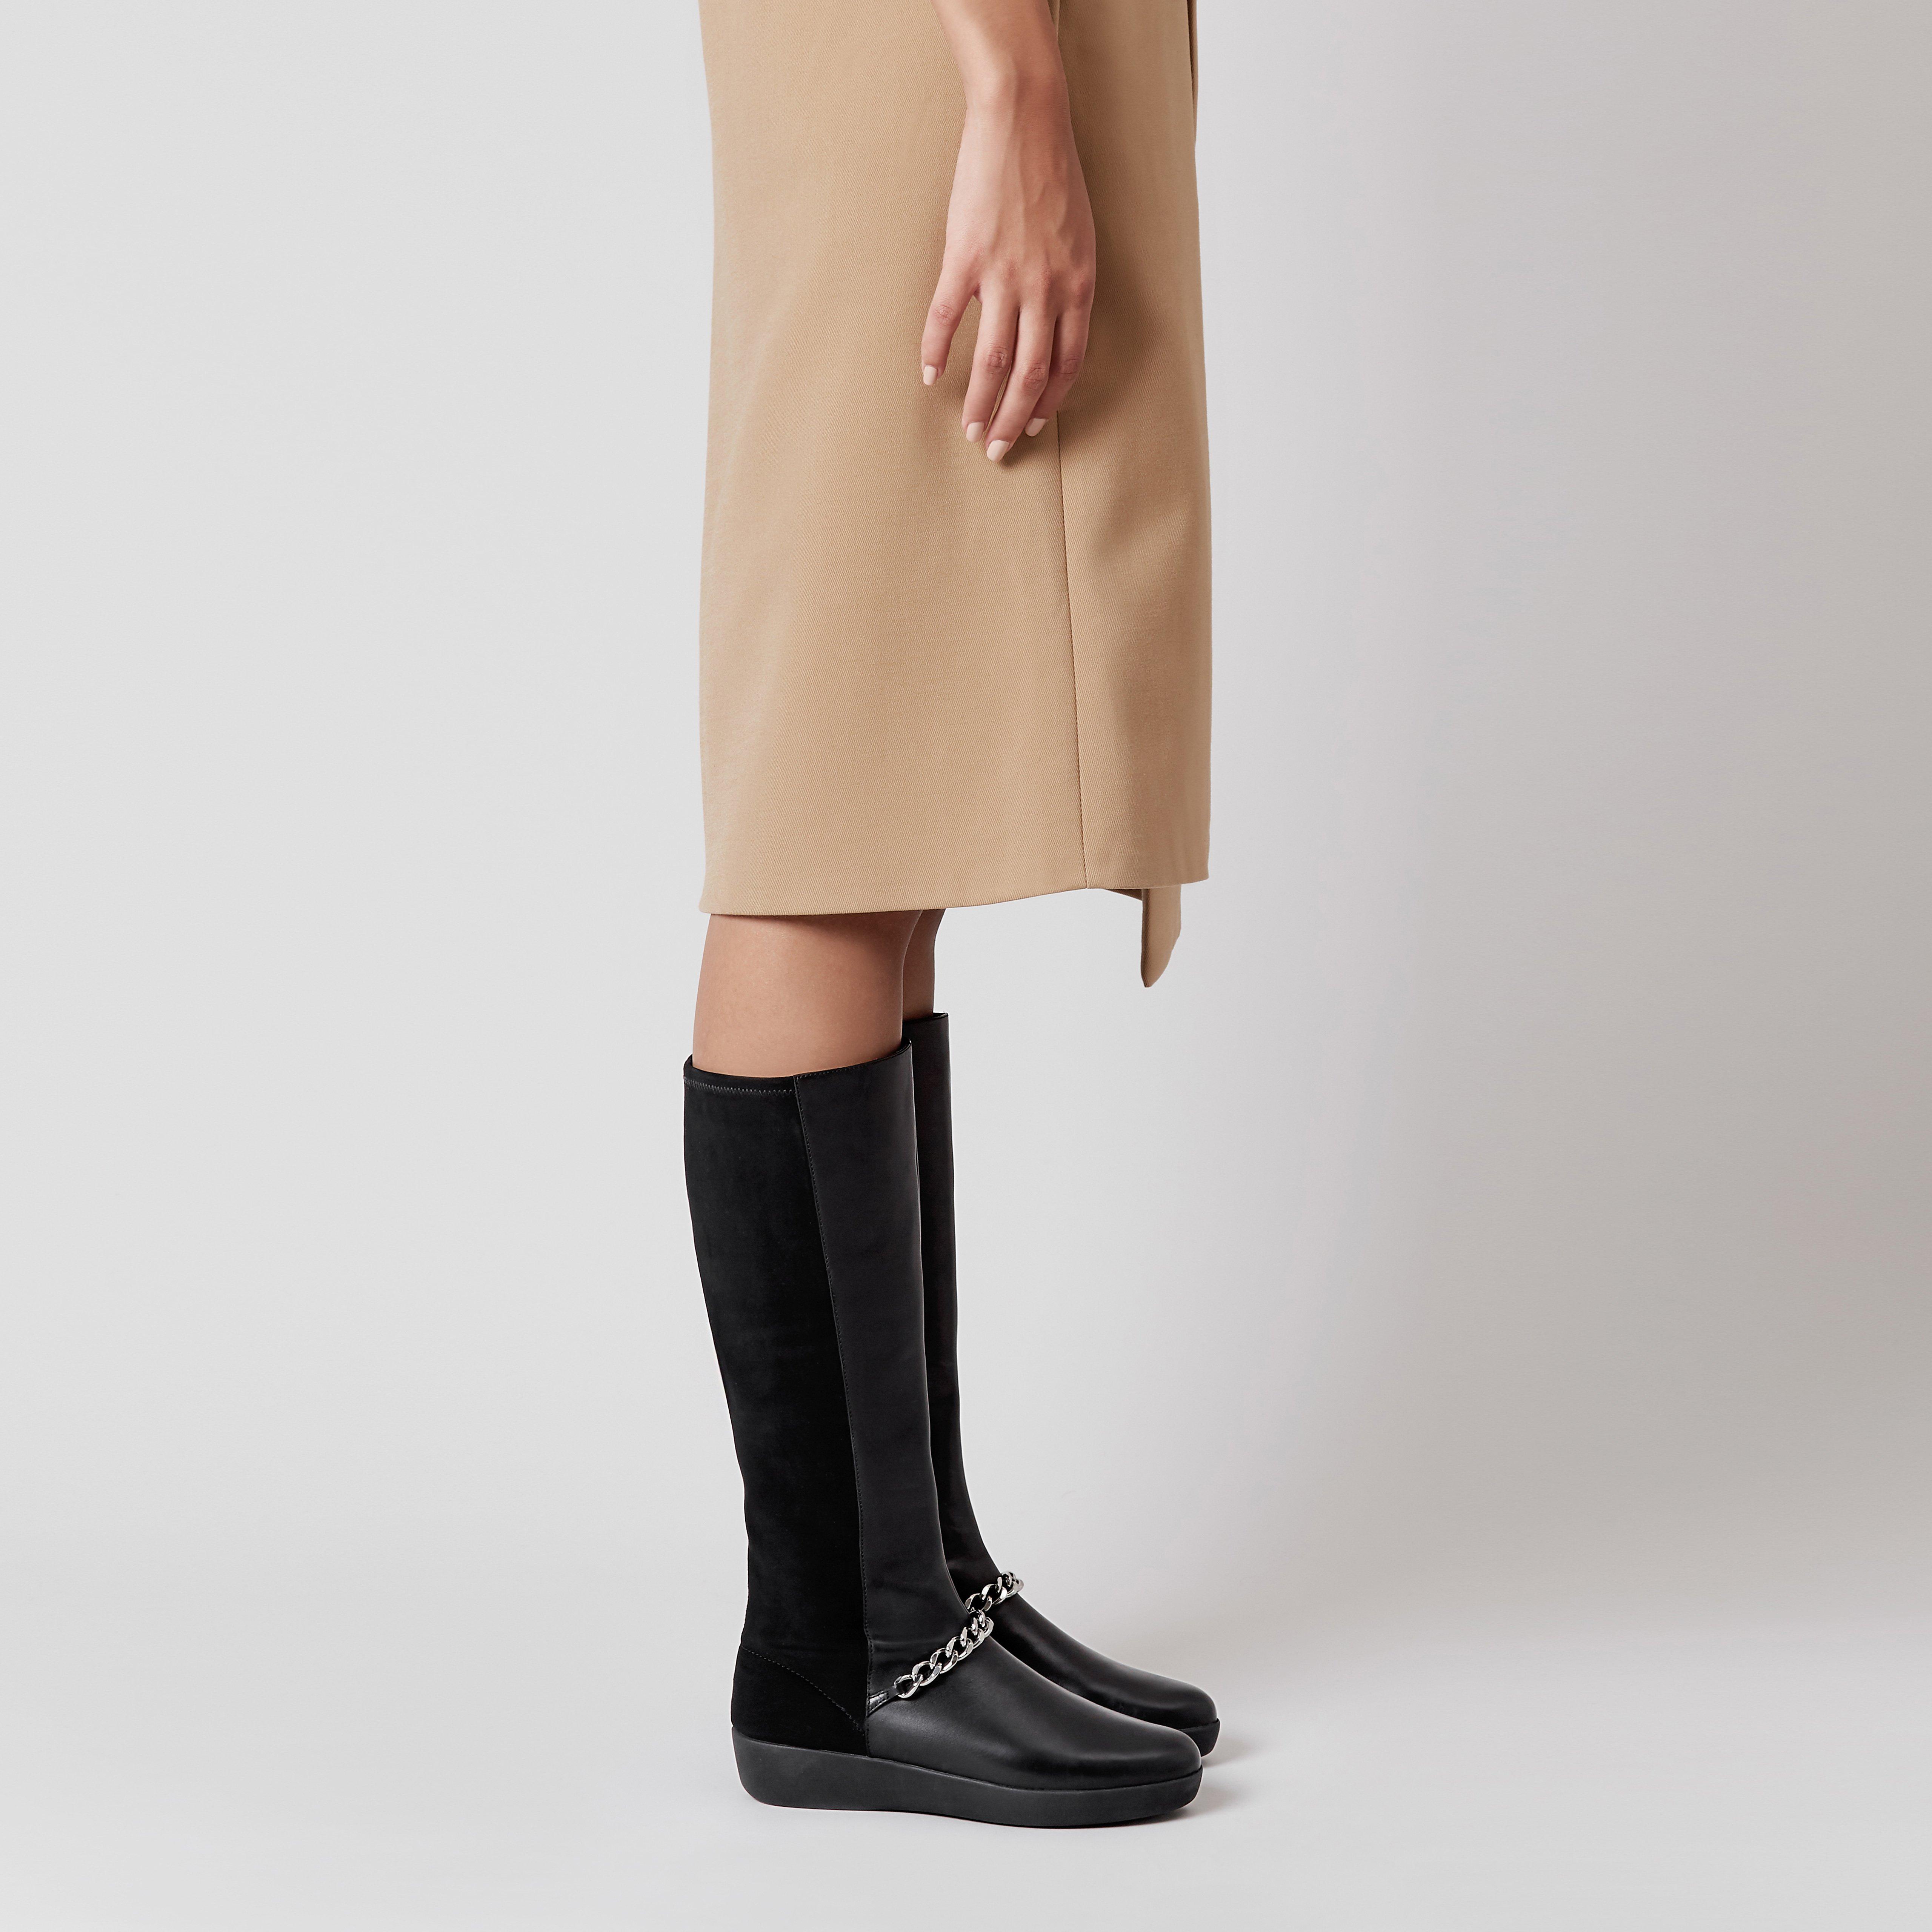 A great pair of knee boots can be one of the most versatile pieces in your winter wardrobe. These sport a shiny chain across the front and a stretch faux-suede back panel for a perfect fit. Featuring our Supercom FF midsoles for amazing all-day comfort, they'll keep your legs warm teamed with a smart dress at the office, and will look just as sophisticated dressed down at the weekends over skinny jeans.